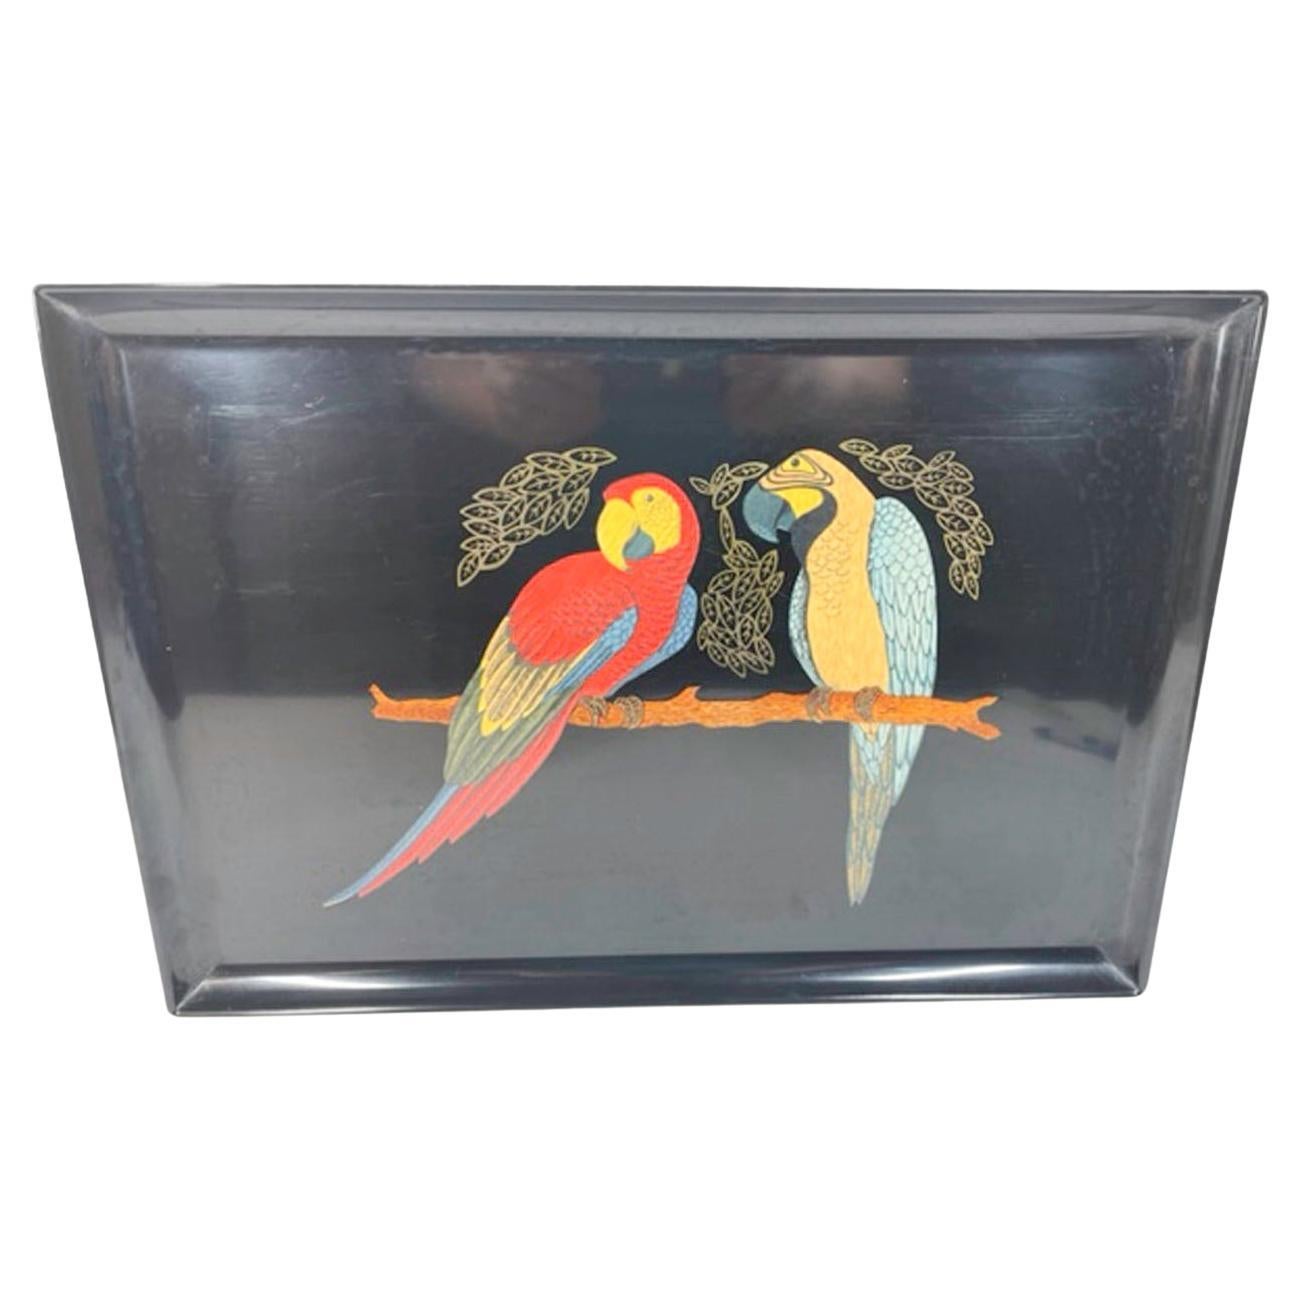 Vintage Couroc Phenolic Resin Serving Tray w/ Wood and Brass Inlaid Macaws